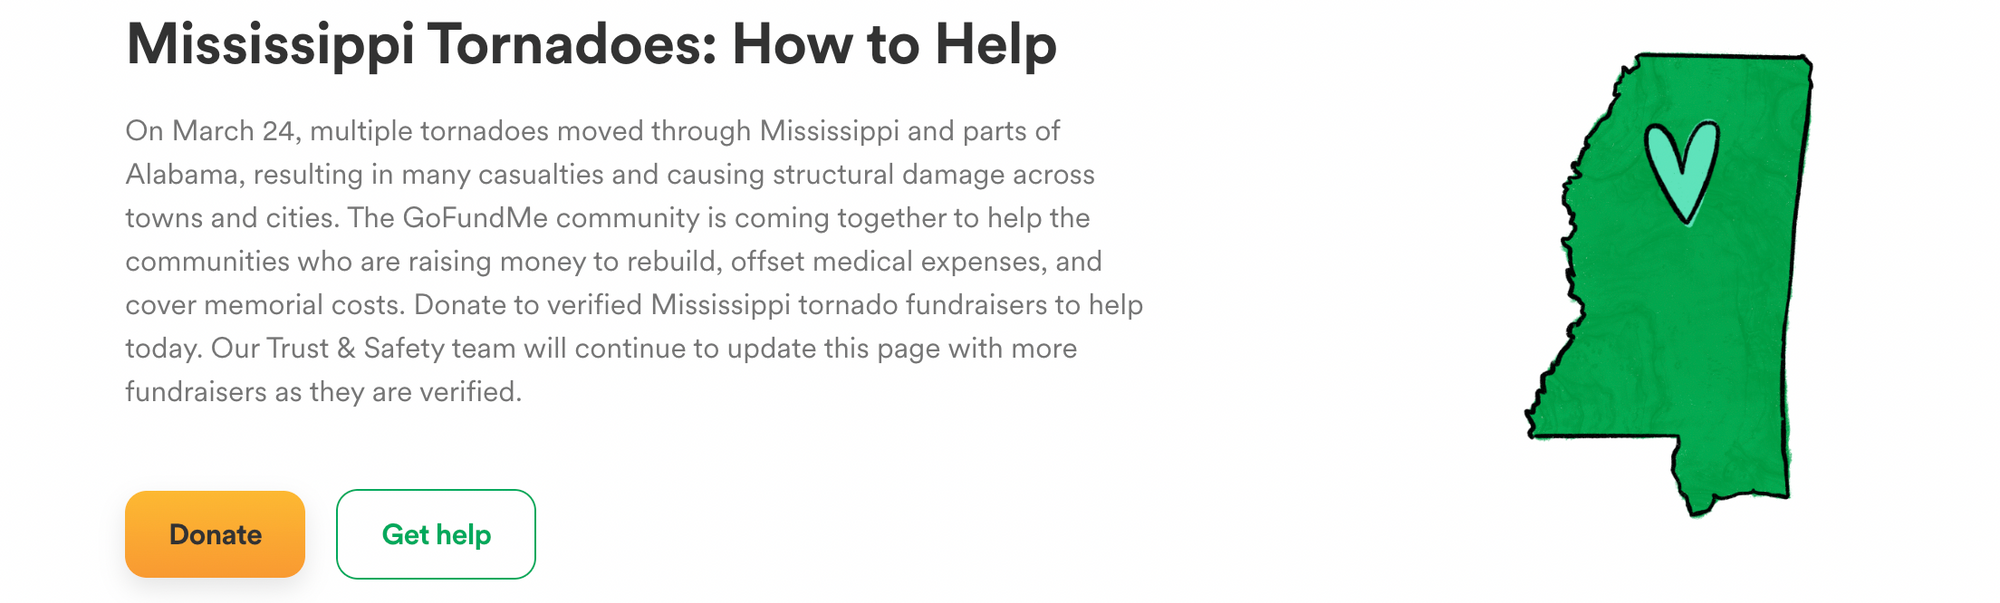 The Coolest Show + tornado relief: Project Mushroom latest